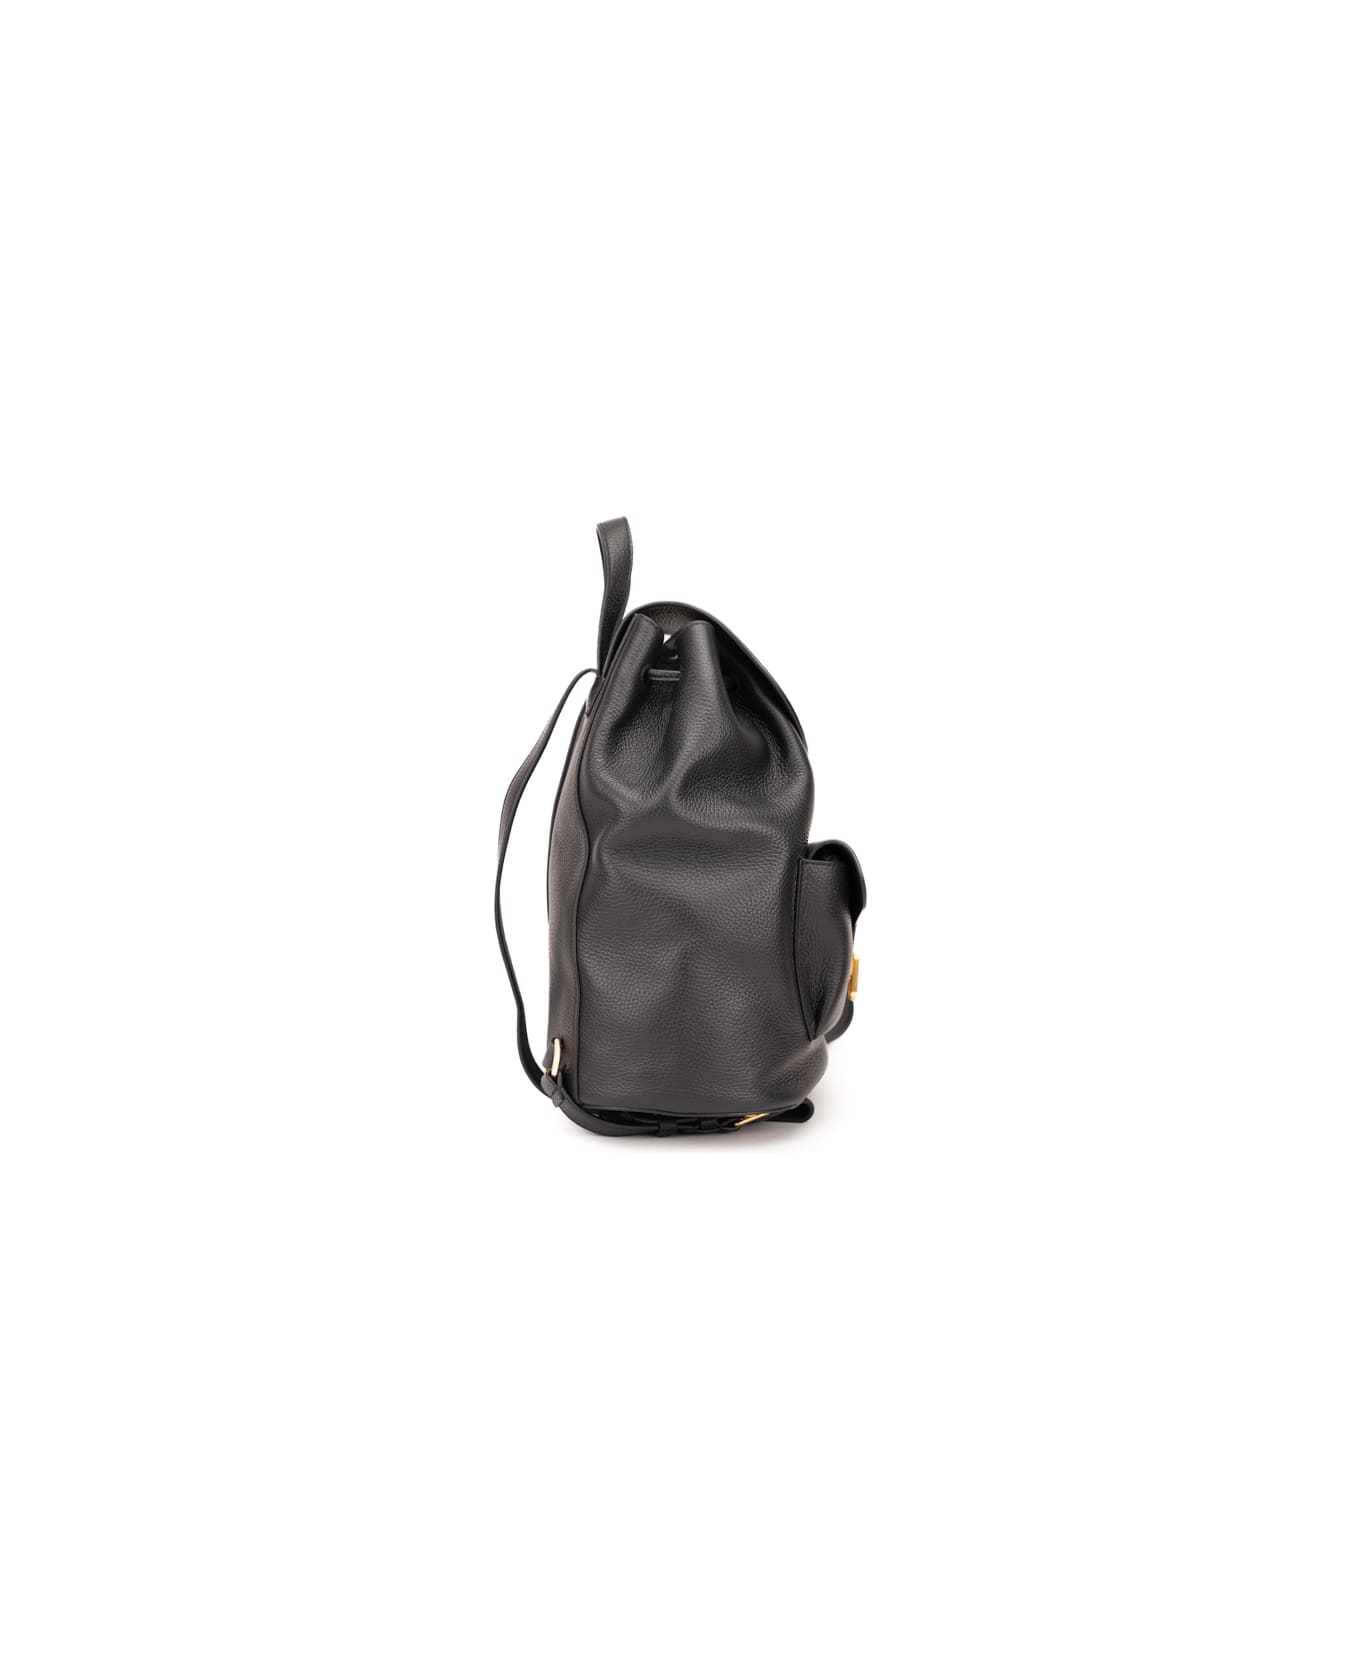 Coccinelle Hammered Leather Backpack - Noir